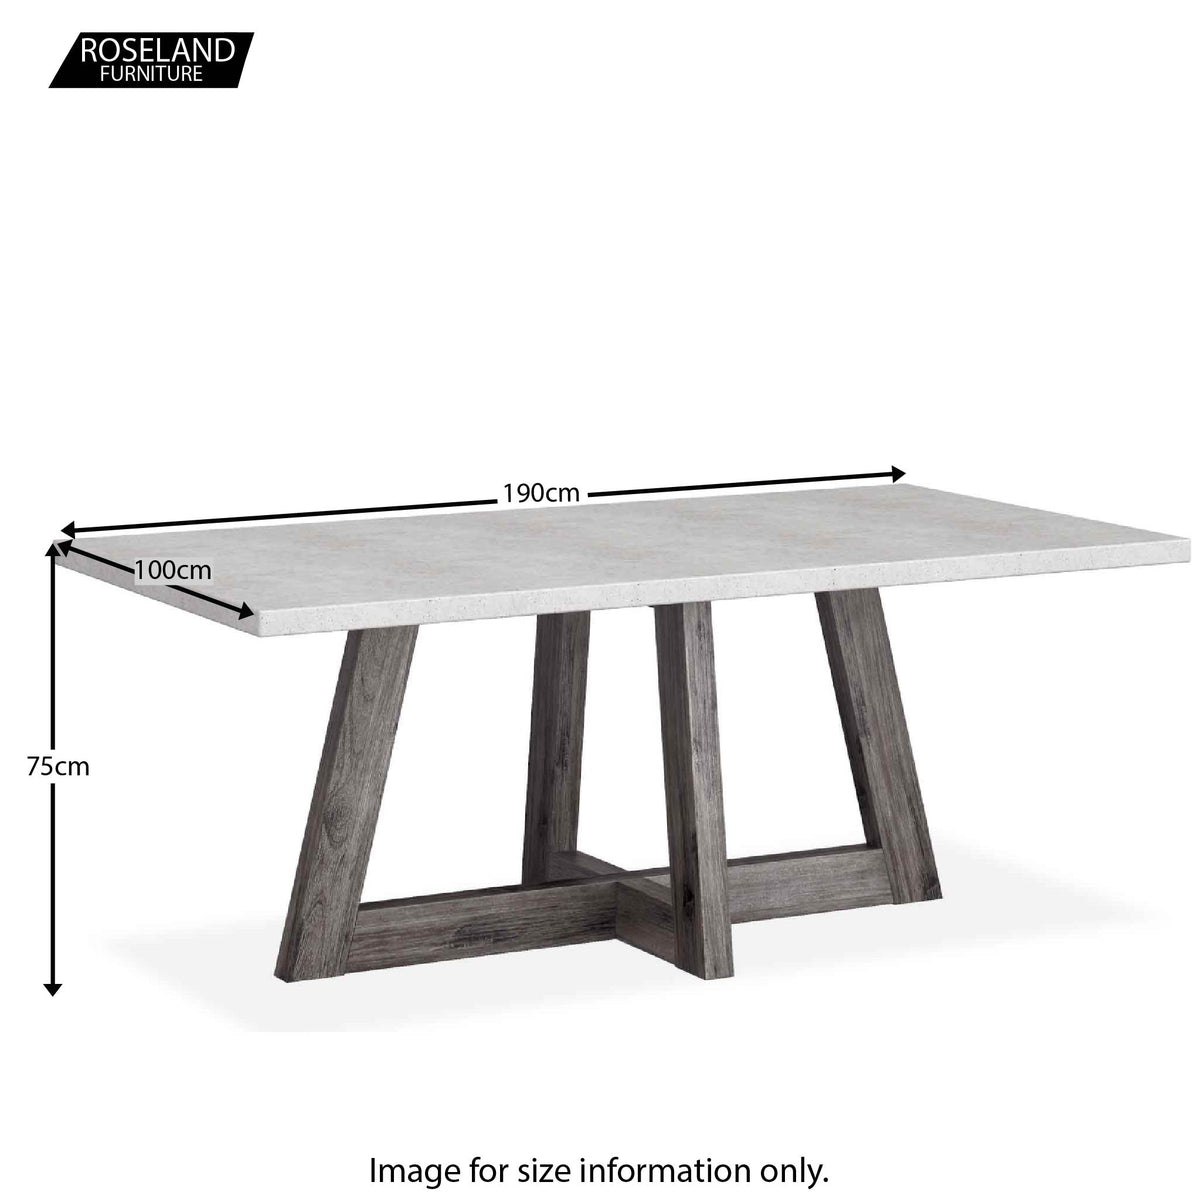 Dimensions for the Saltaire Grey Industrial Concrete Dining Table from Roseland Furniture